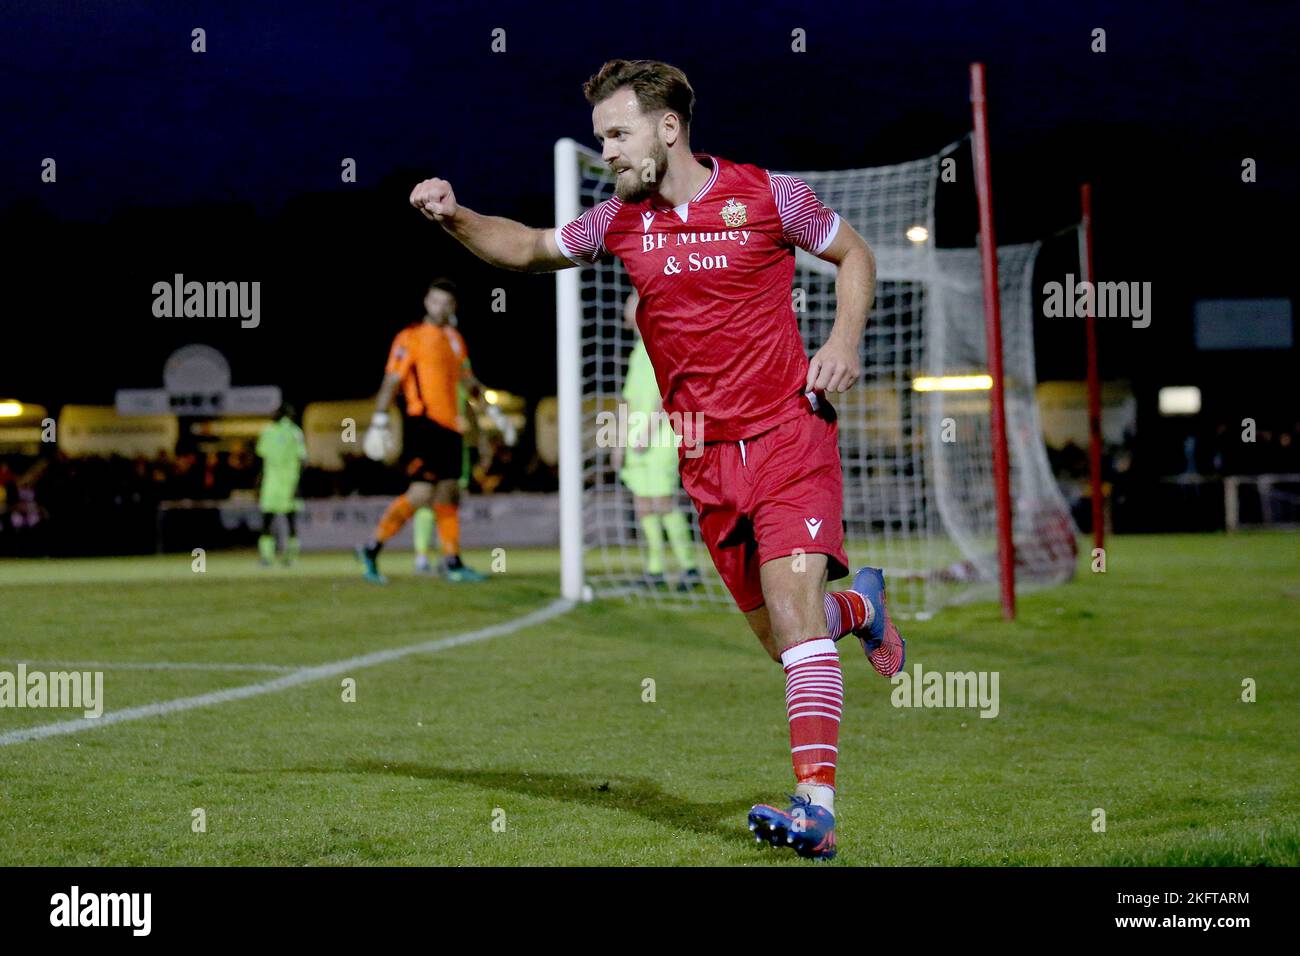 Danny Green of Hornchurch scores the second goal for his team and celebrates during Hornchurch vs Wingate & Finchley, Pitching In Isthmian League Prem Stock Photo